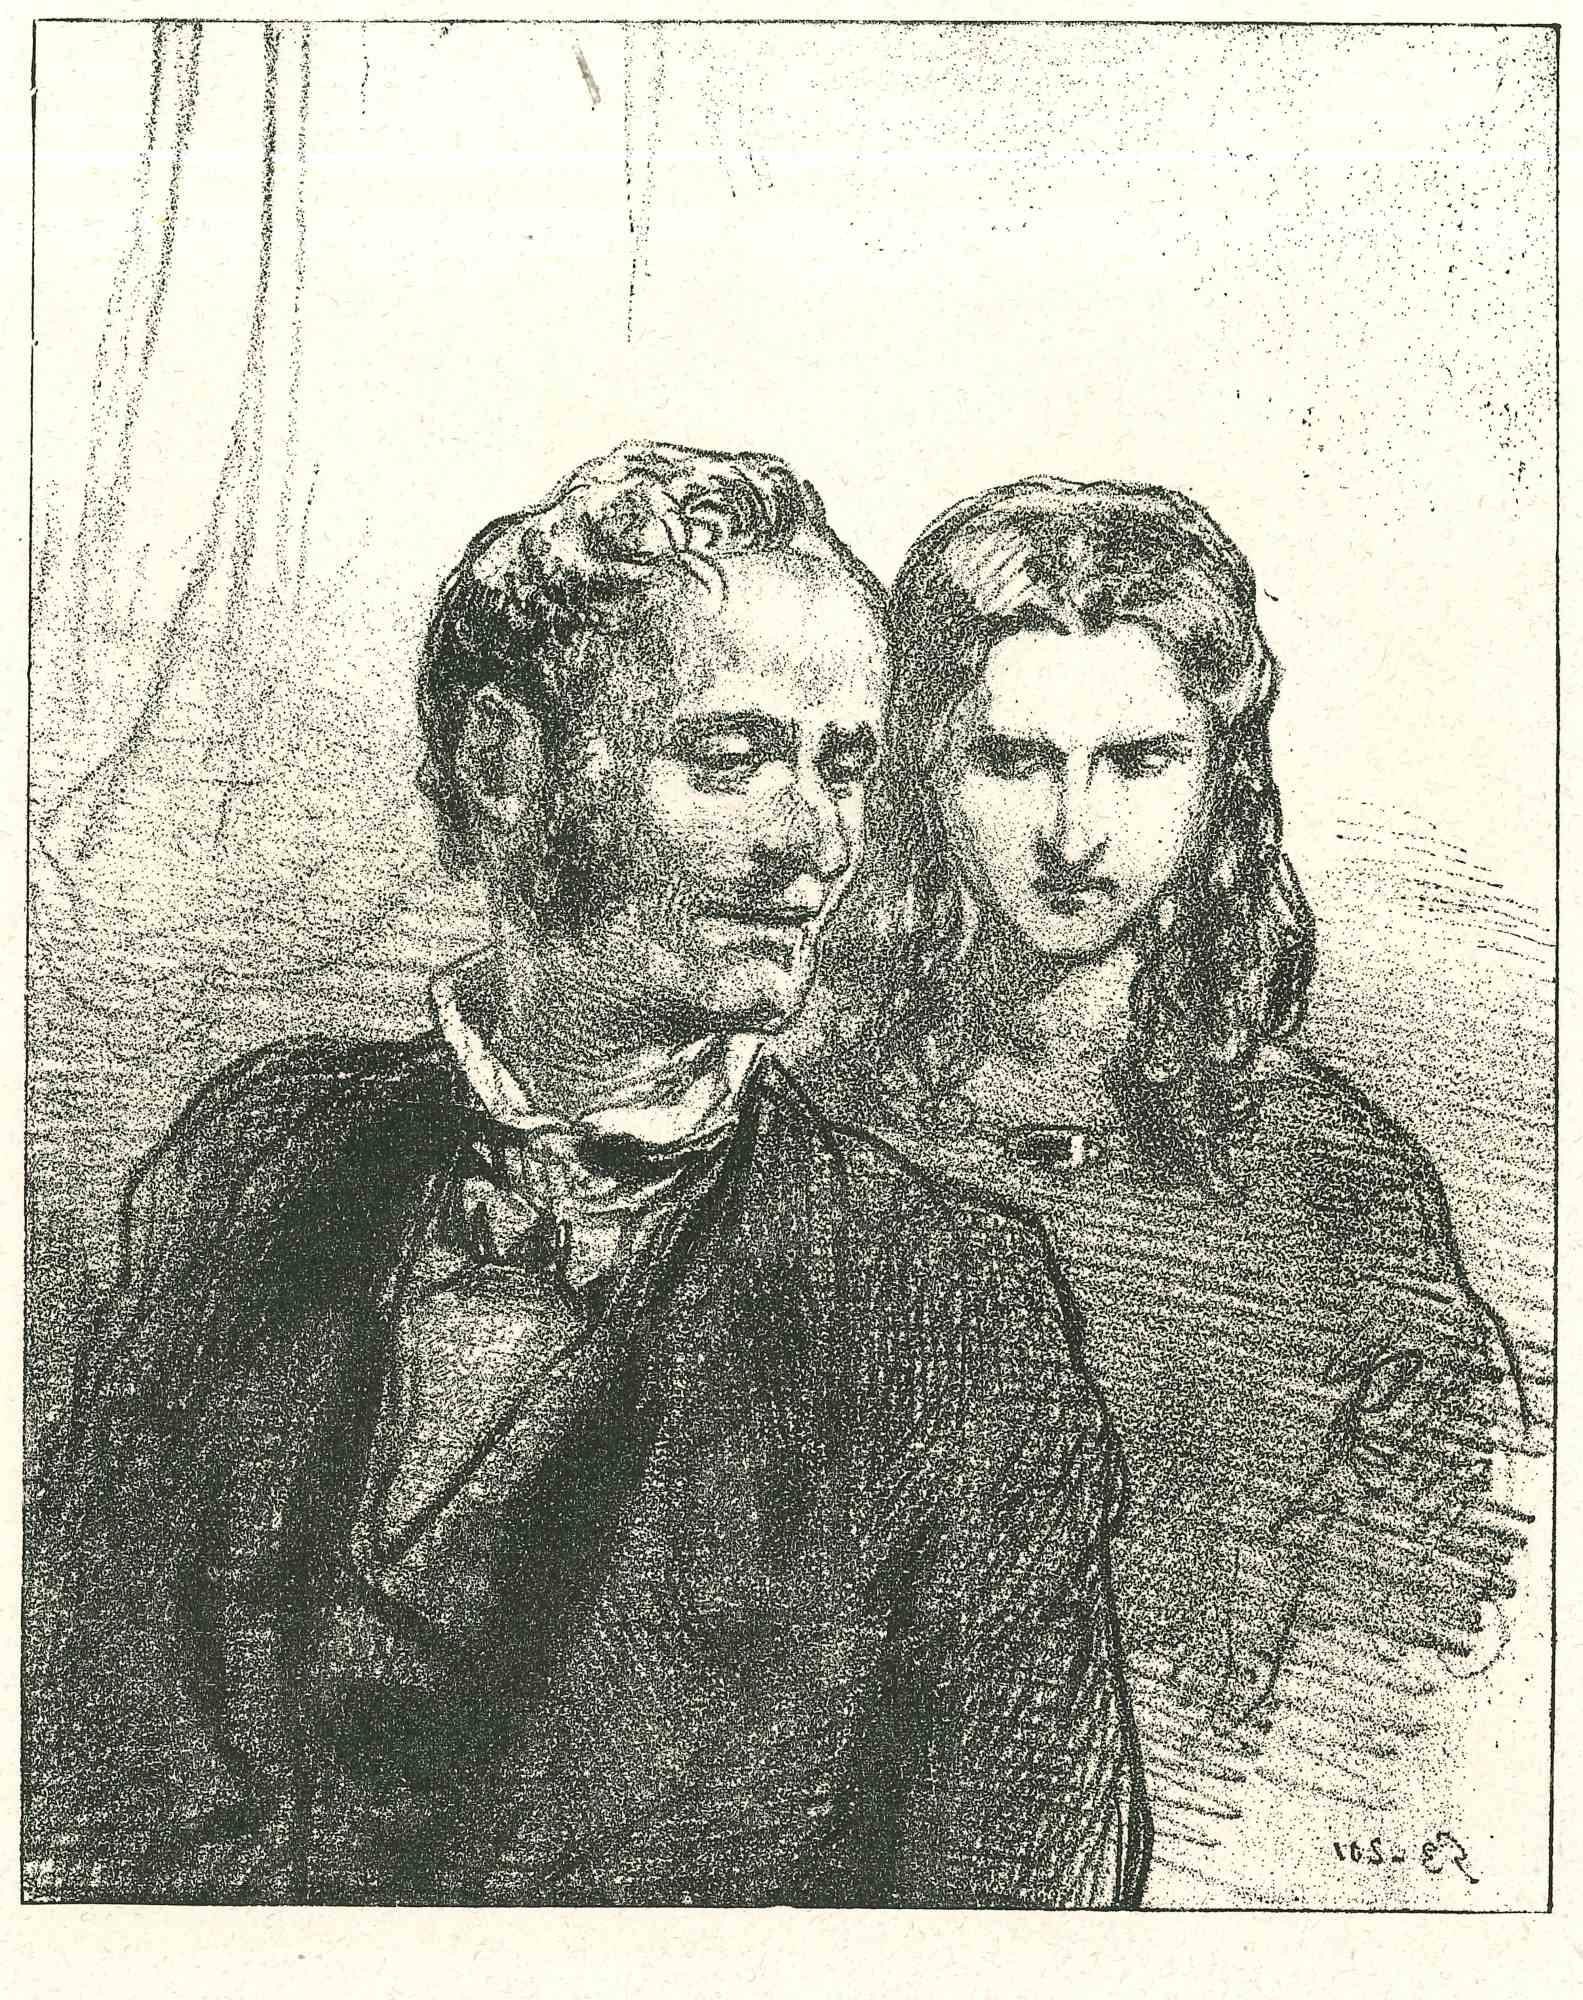 The Couple is an original lithograph artwork on ivory-colored paper, realized by the French draftsman Paul Gavarni (after) (alias Guillaume Sulpice Chevalier Gavarni, 1804-1866) in Paris, 1881, in the collection of Illustrations for "La Mascarade